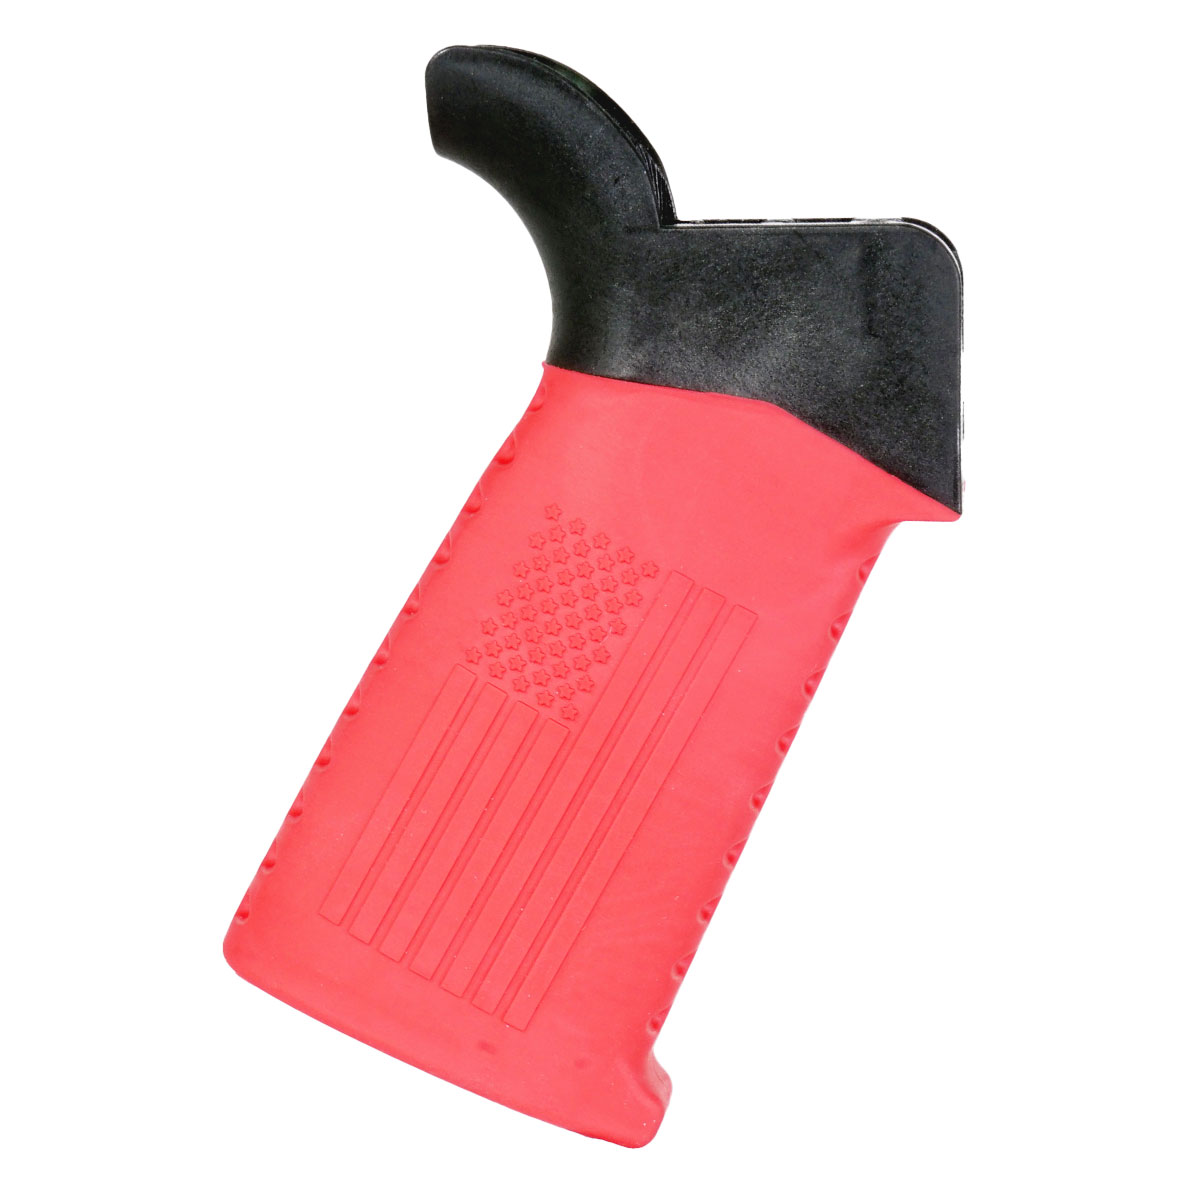 Team Accessories Corp AR15 Grip Window Grip Flared Flag/Ribbed Red